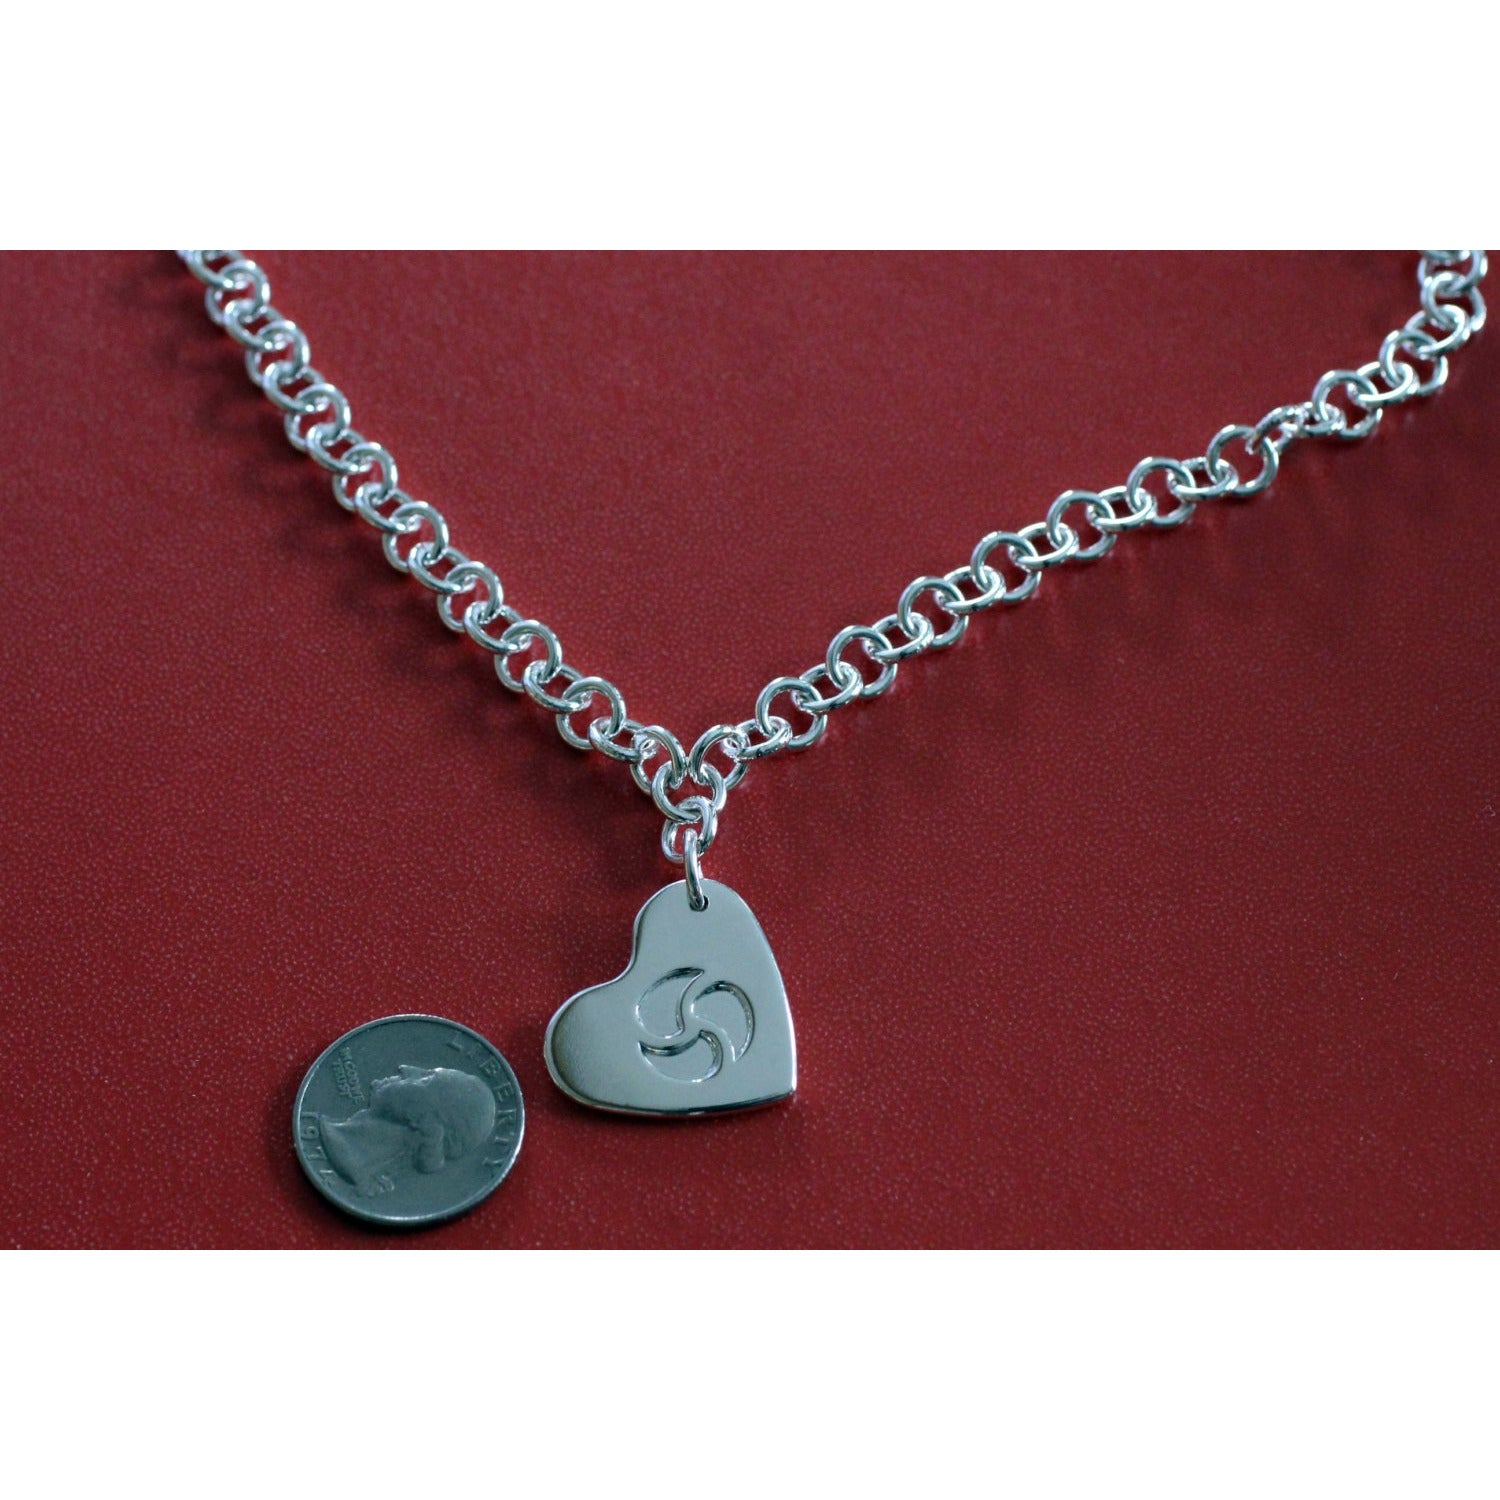 Sterling Silver BDSM Heart, Hidden Triskelion pendant, Day Collar, Heavy Chain Collar Choker Necklace  Made to order